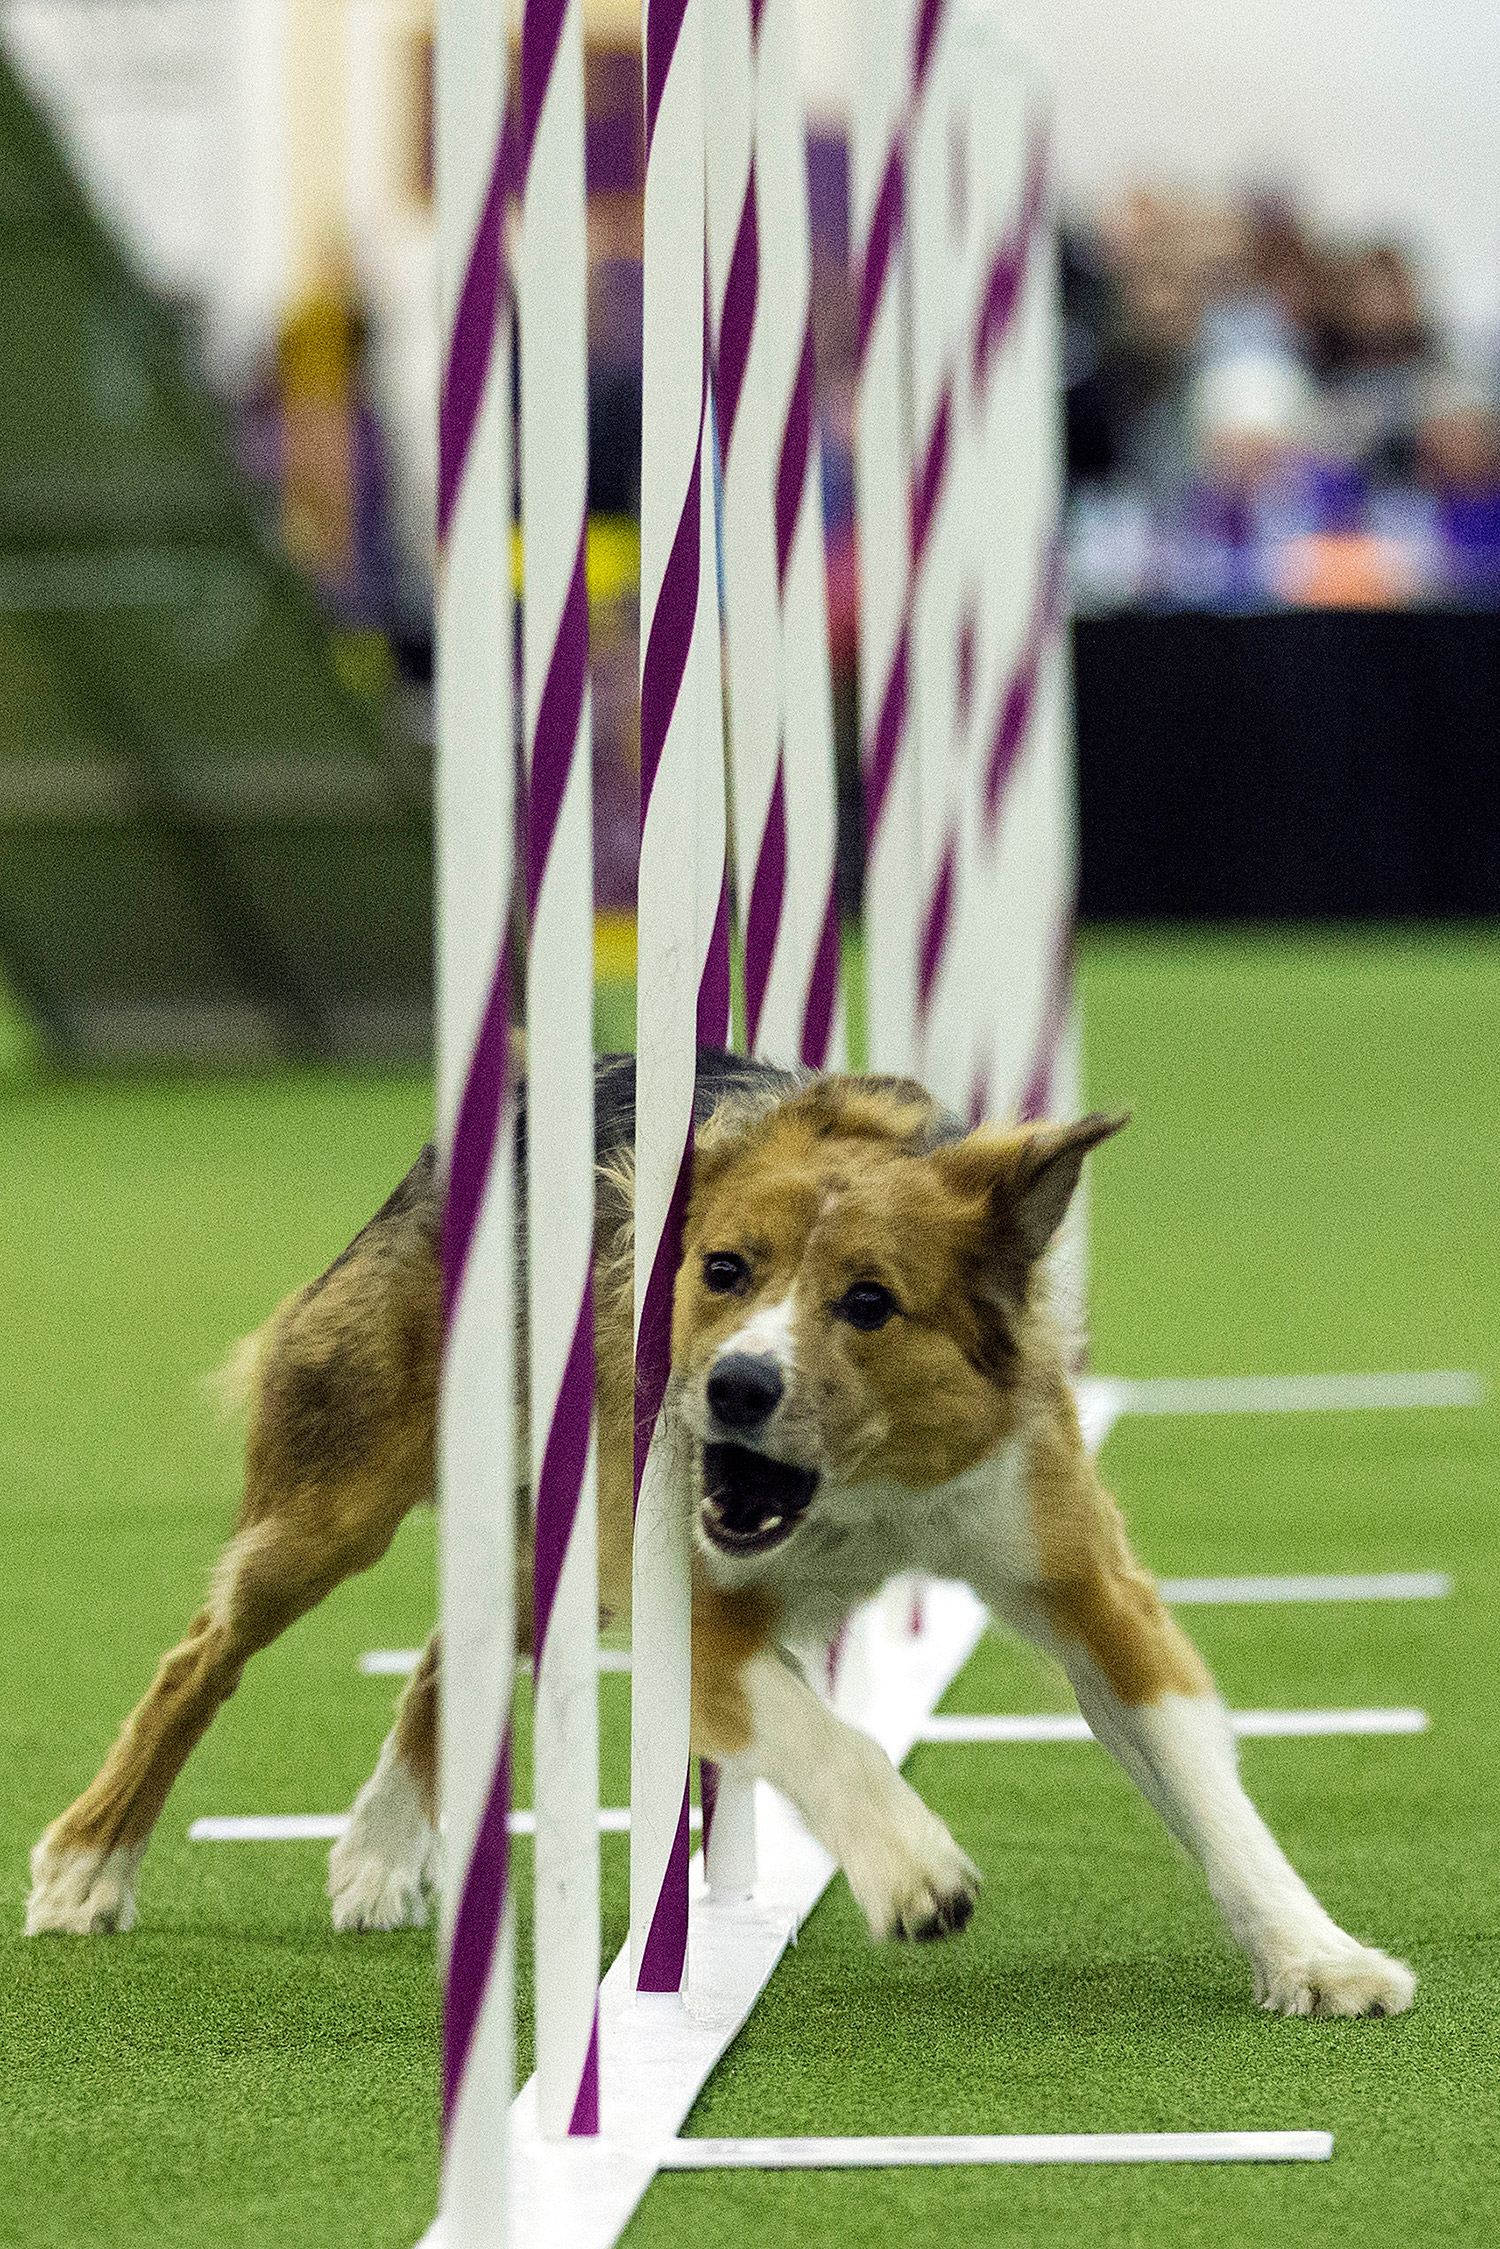 At Westminster dog show, agility puts border collies front and center